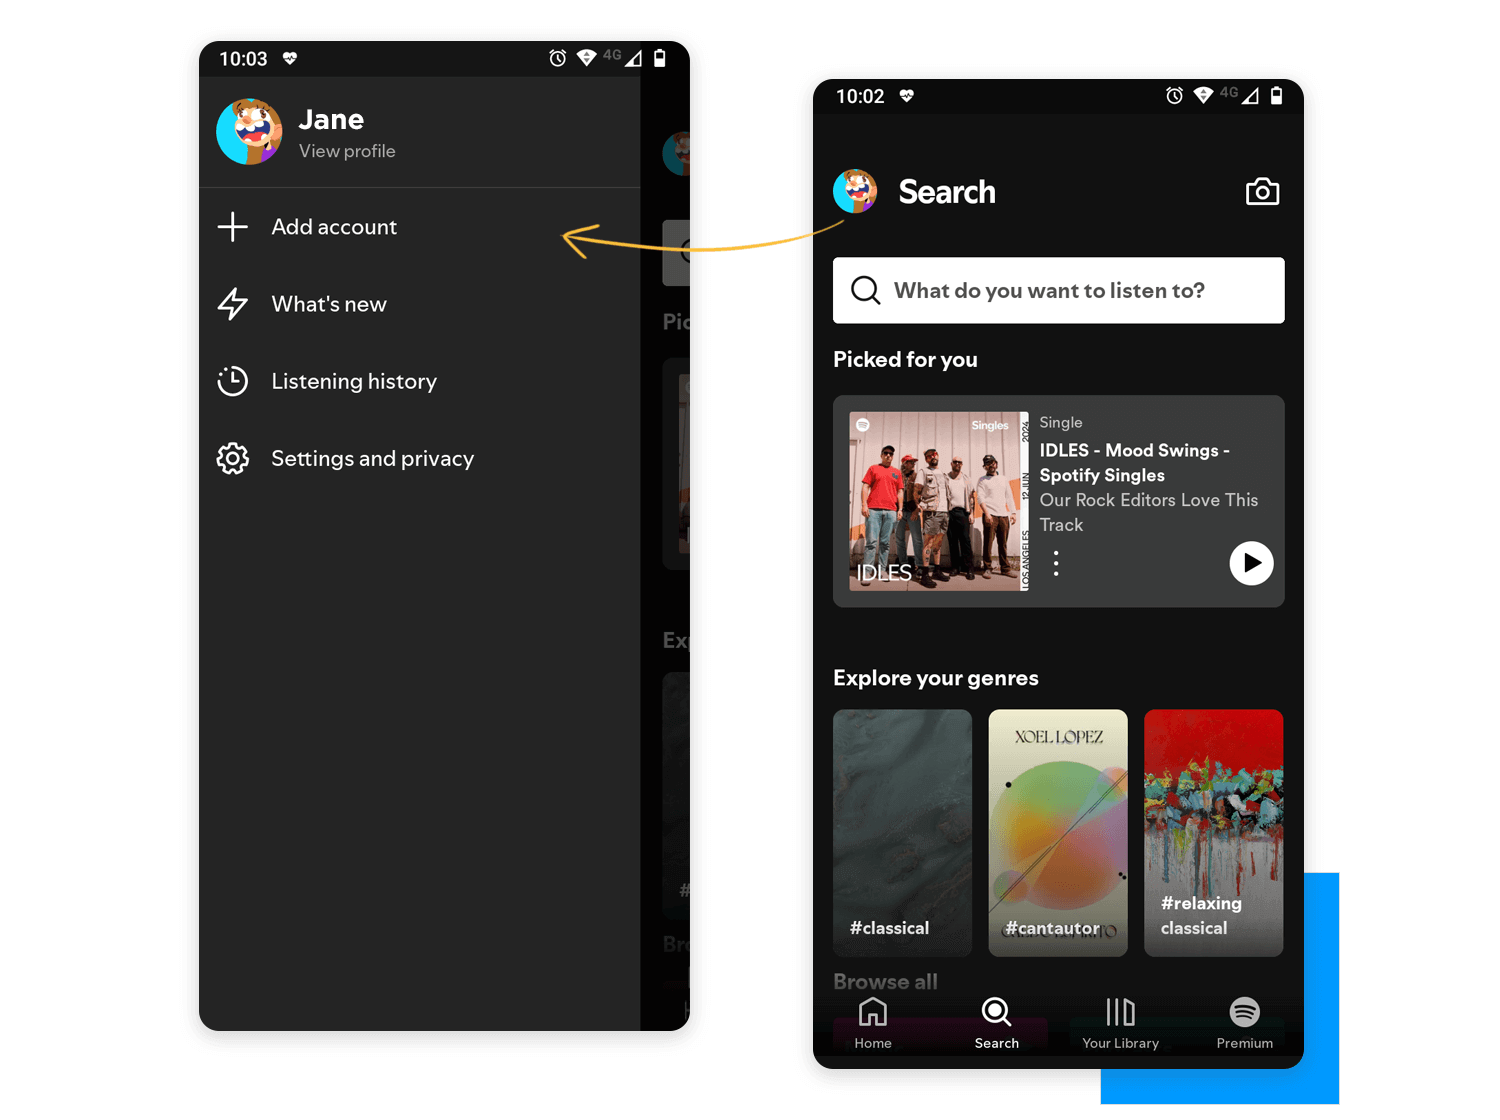 Music app interface with off-canvas navigation showing options like Add account, What's new, Listening history, and Settings